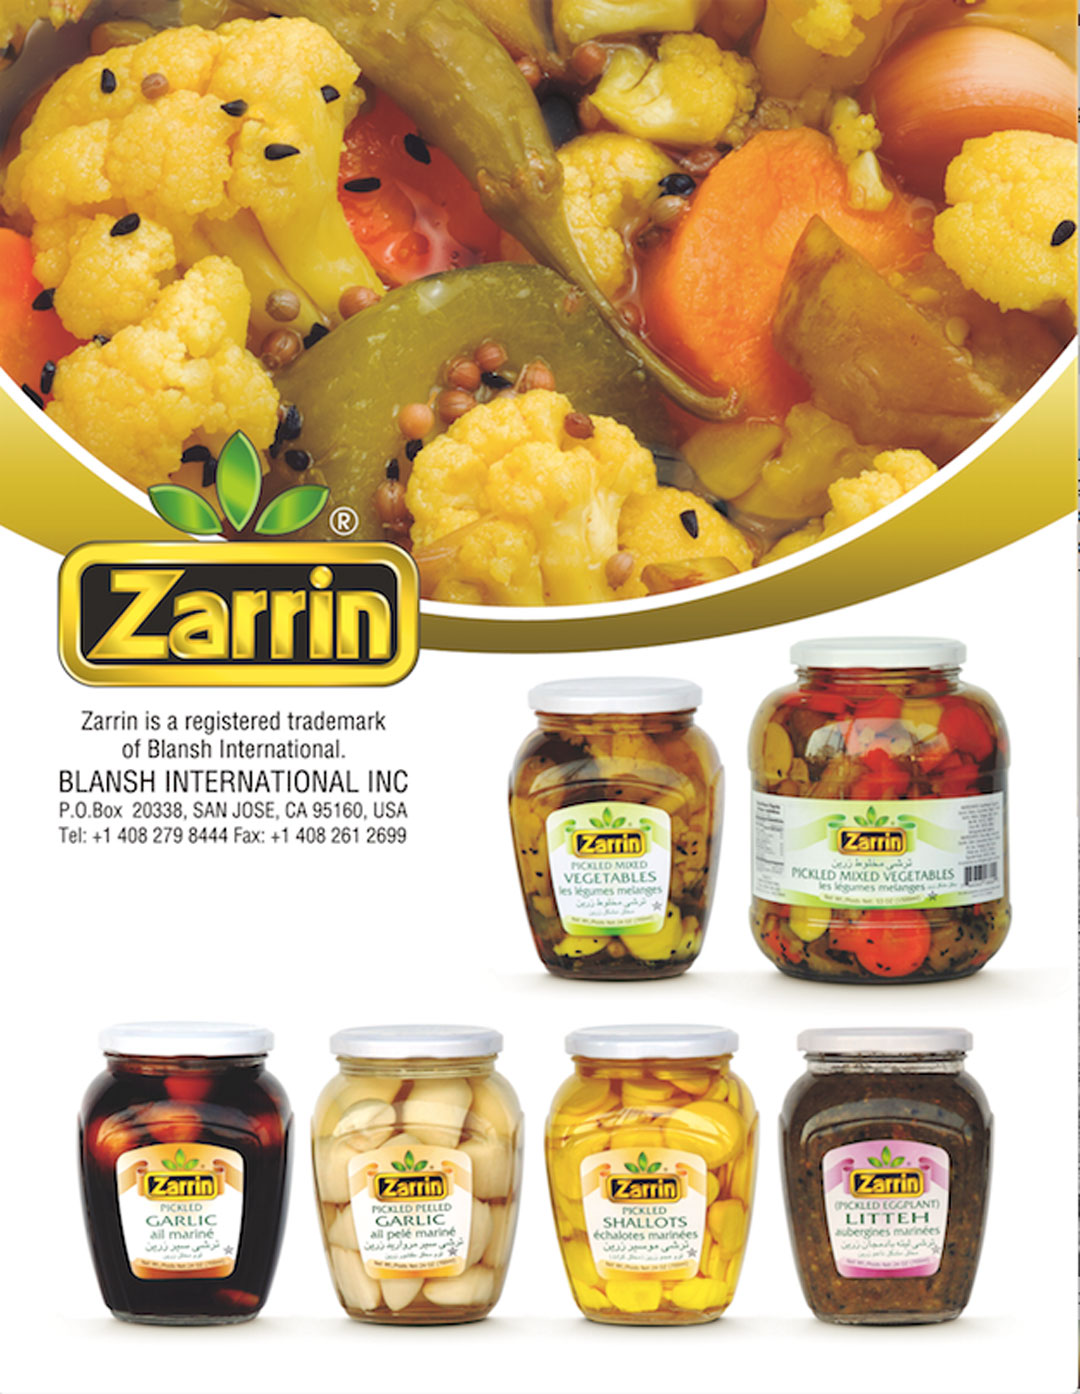 Zarrin imports pickles such as cucumbers, garlic, eggplant, litteh, and shallots.